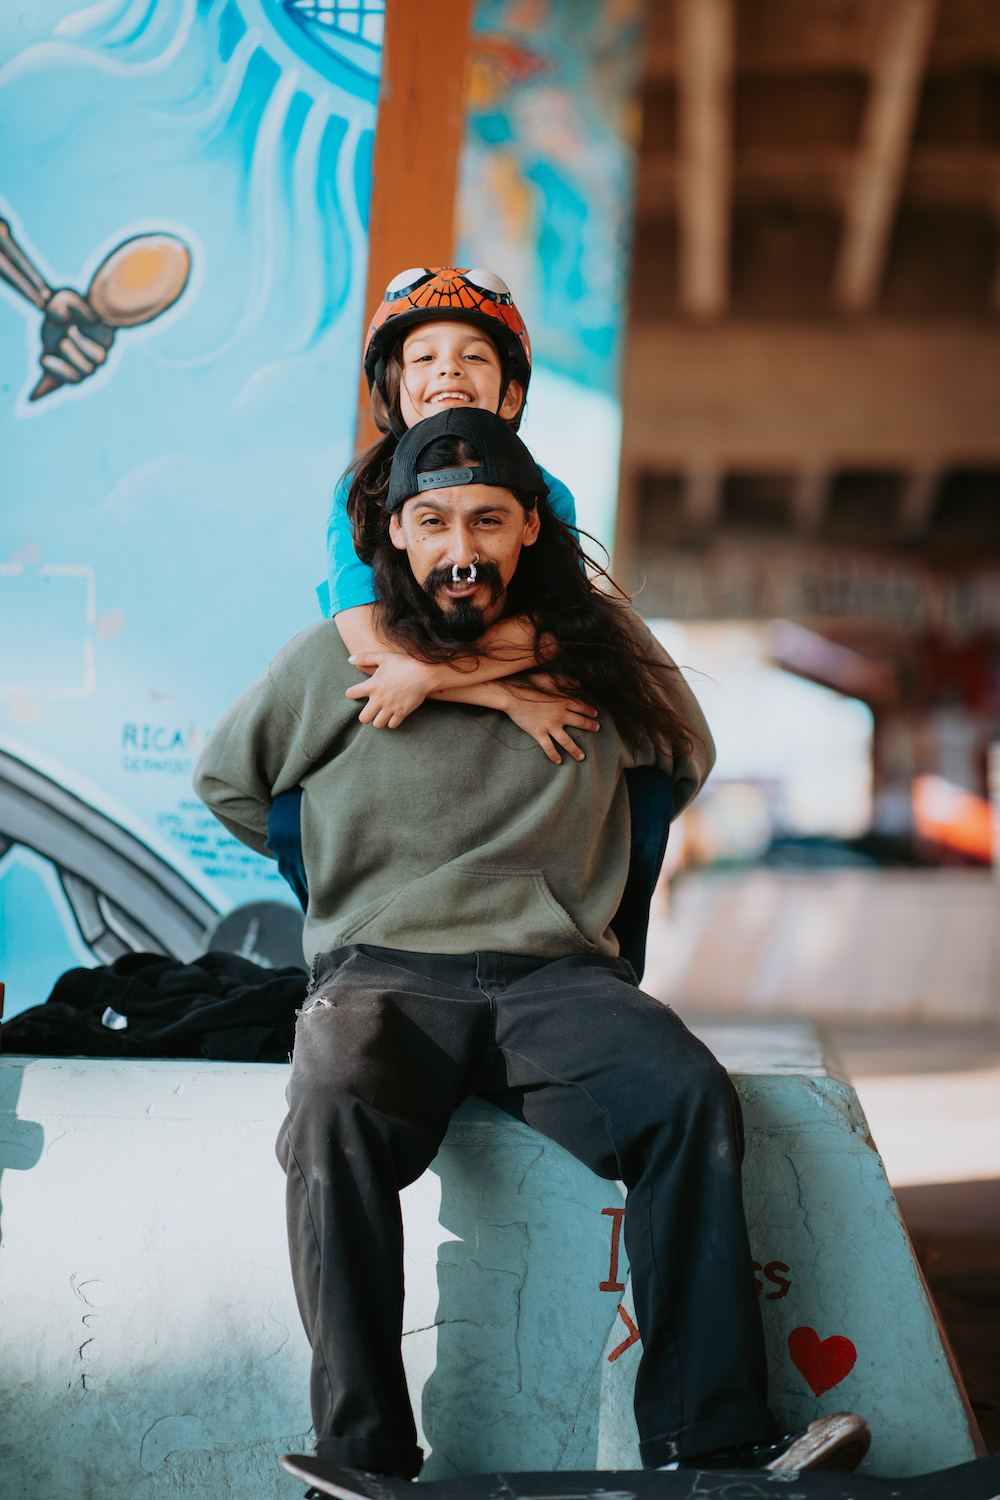 San Diego skater fashion featuring father and daughter skateboarders at Chicano Park Skatepark, Barrio Logan